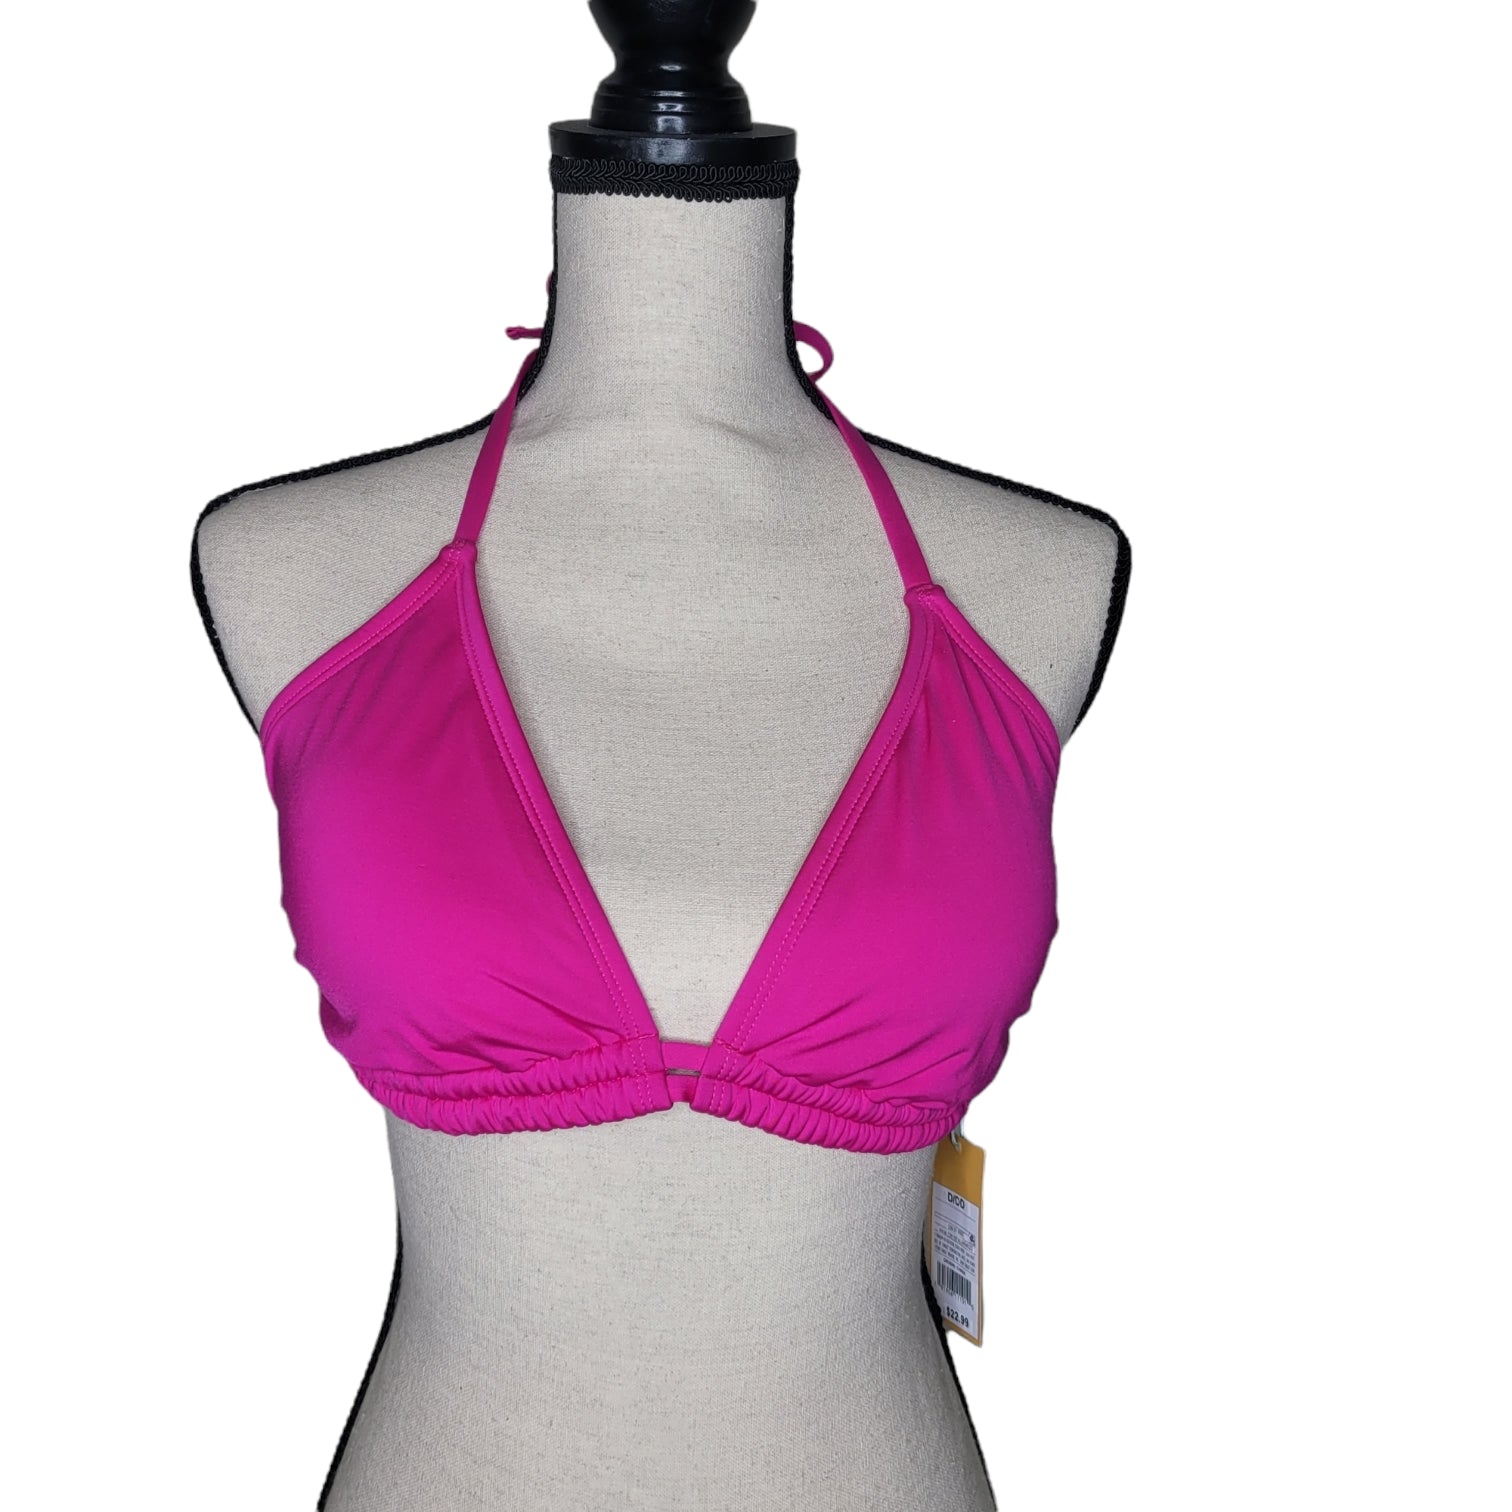 Kona Sol Pink Crystal New with Tags Bathing Suit Top Cup Size D/DD